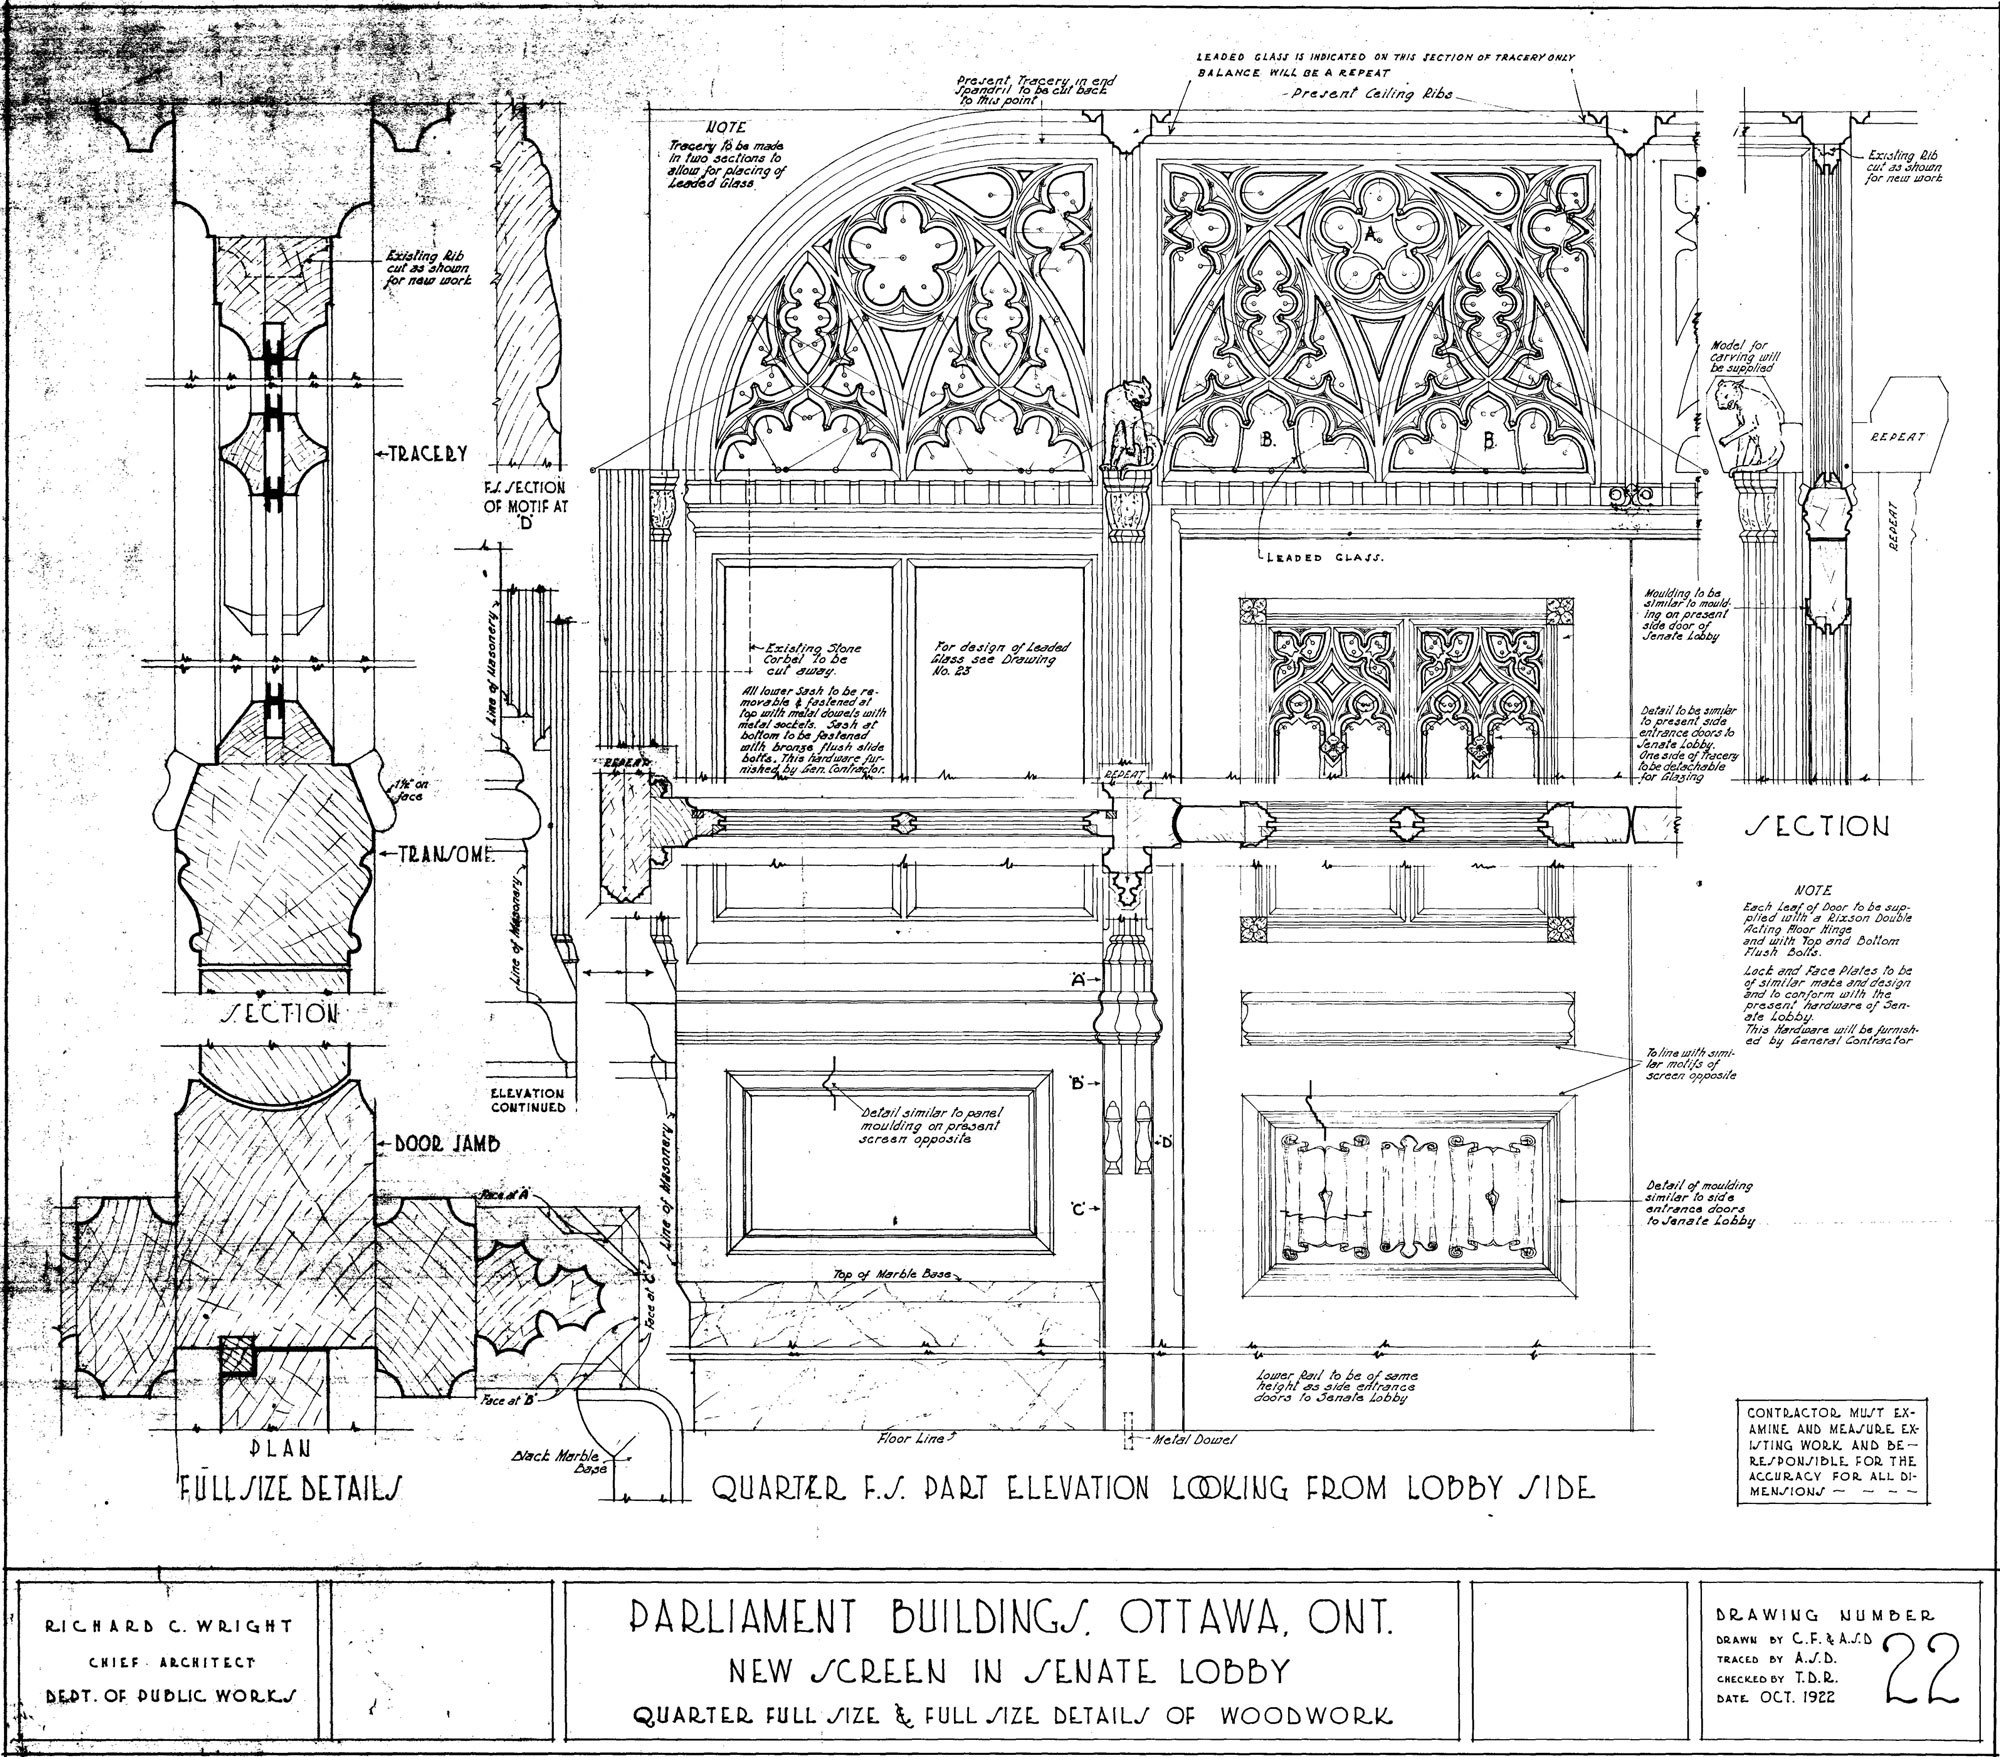 Conservators referenced existing original blueprints for the Senate Chamber in Centre Block to best understand Mr. Pearson’s vision of the woodwork and how it was assembled.